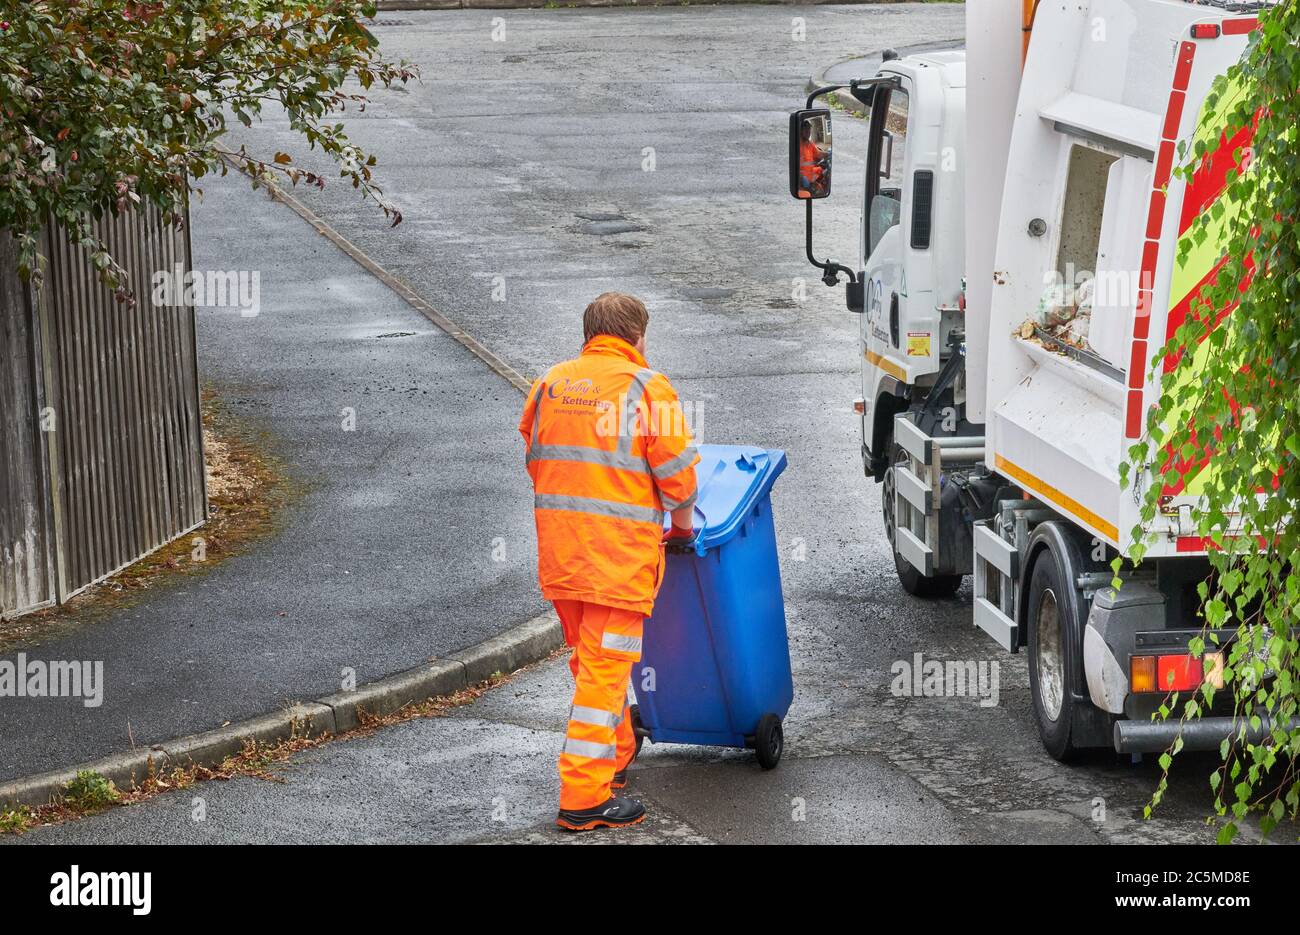 A recycling collector, in high visibility orange clothing, pushes a blue wheelie bin full of household food waste towards a refuse collection van. Stock Photo